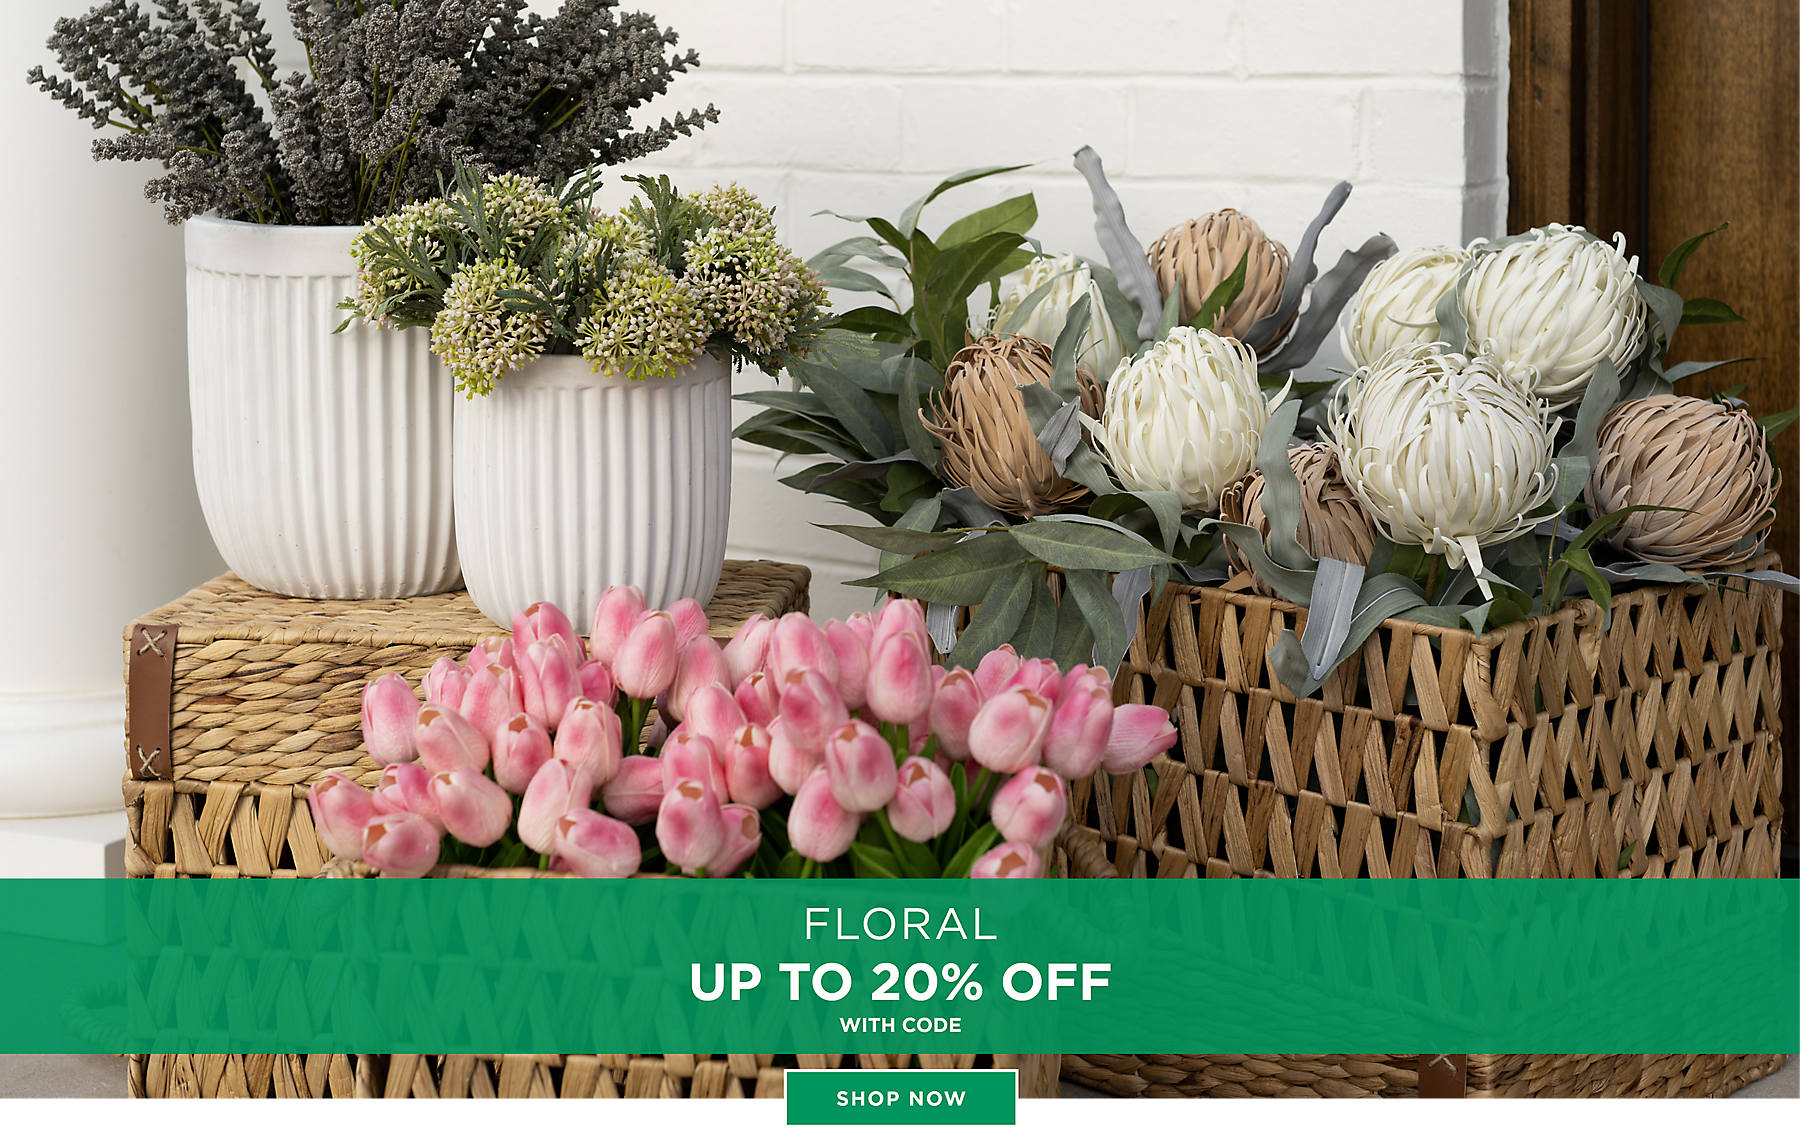 Floral Up to 20% Off with code Shop Now